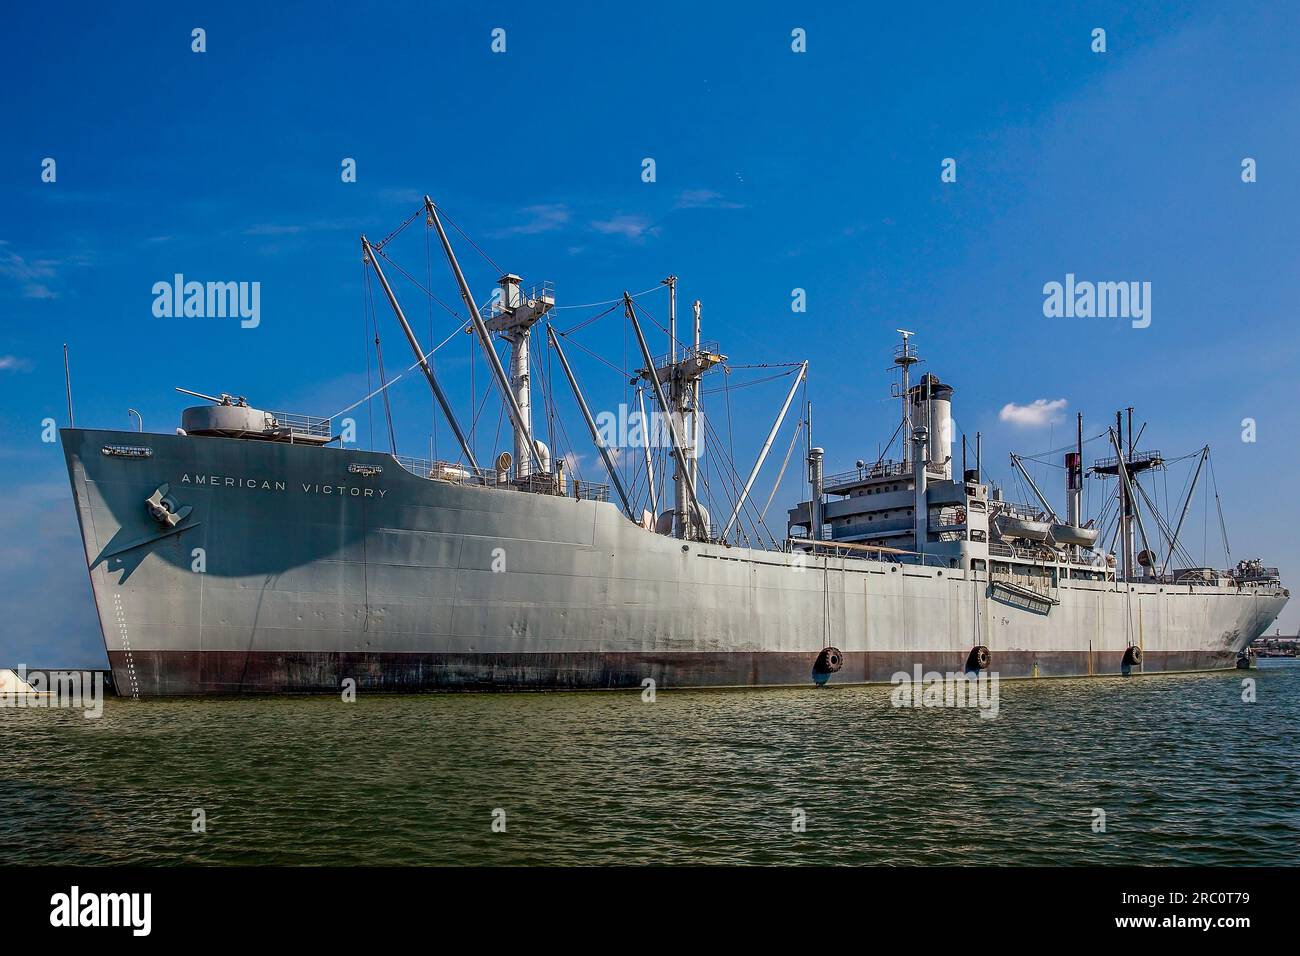 The SS American Victory ship, Tampa, Florida. WSA-hull designation No. 792. WWII Victory ship. Stock Photo